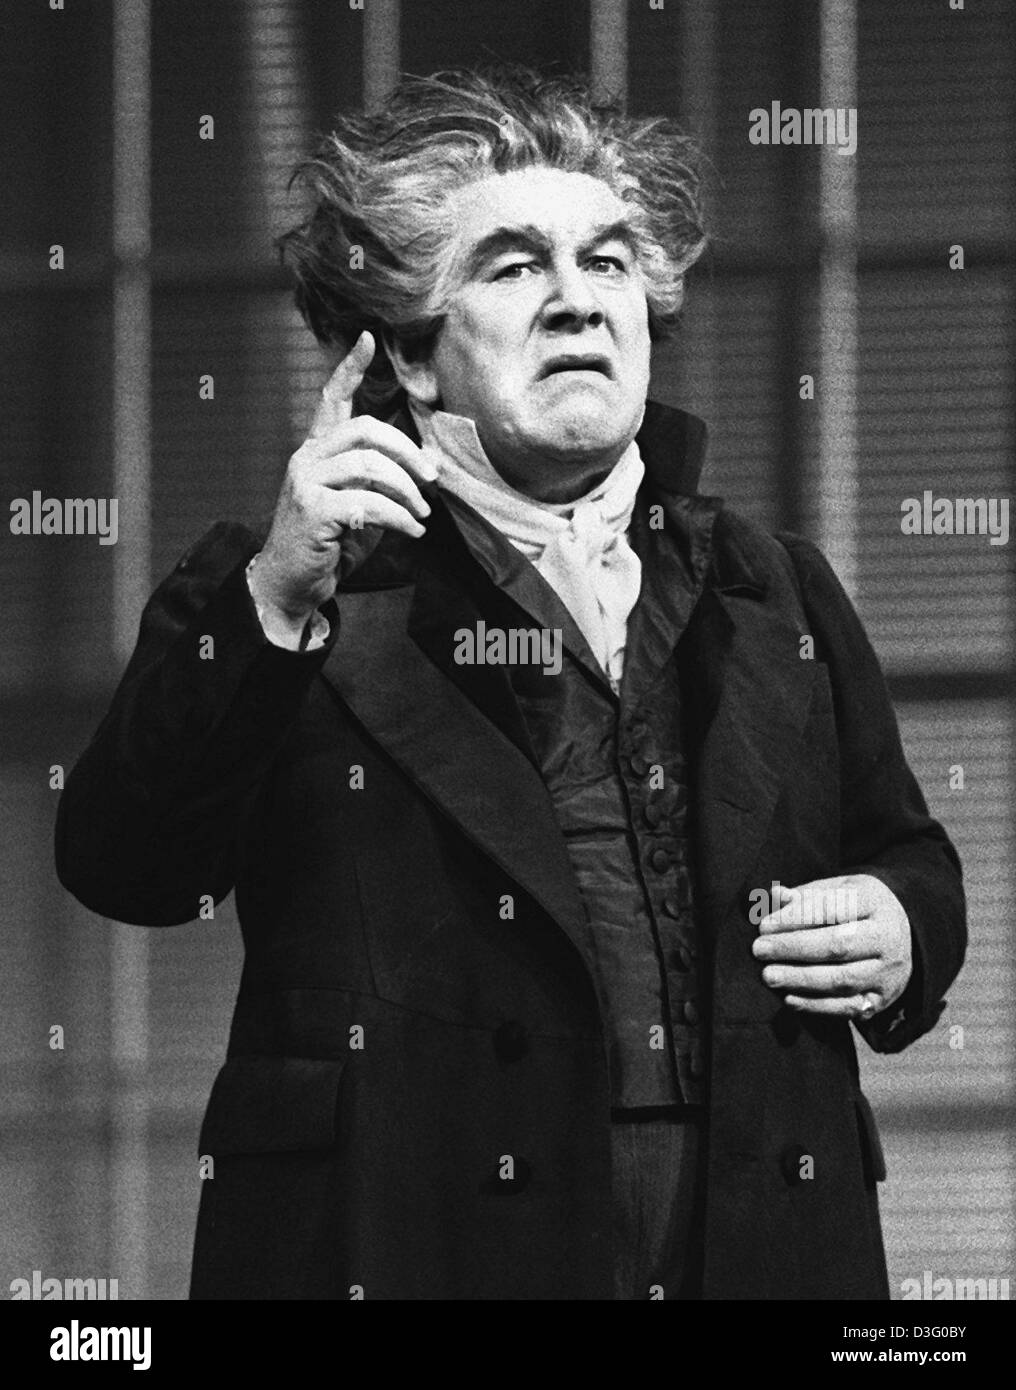 (dpa files) - Actor and entertainer Peter Ustinov plays composer Ludwig van Beethoven in the theatre piece 'Beethoven's Zehnte' (Beethoven's Tenth) at the Schiller Theatre in West Berlin, 31 December 1987. Stock Photo